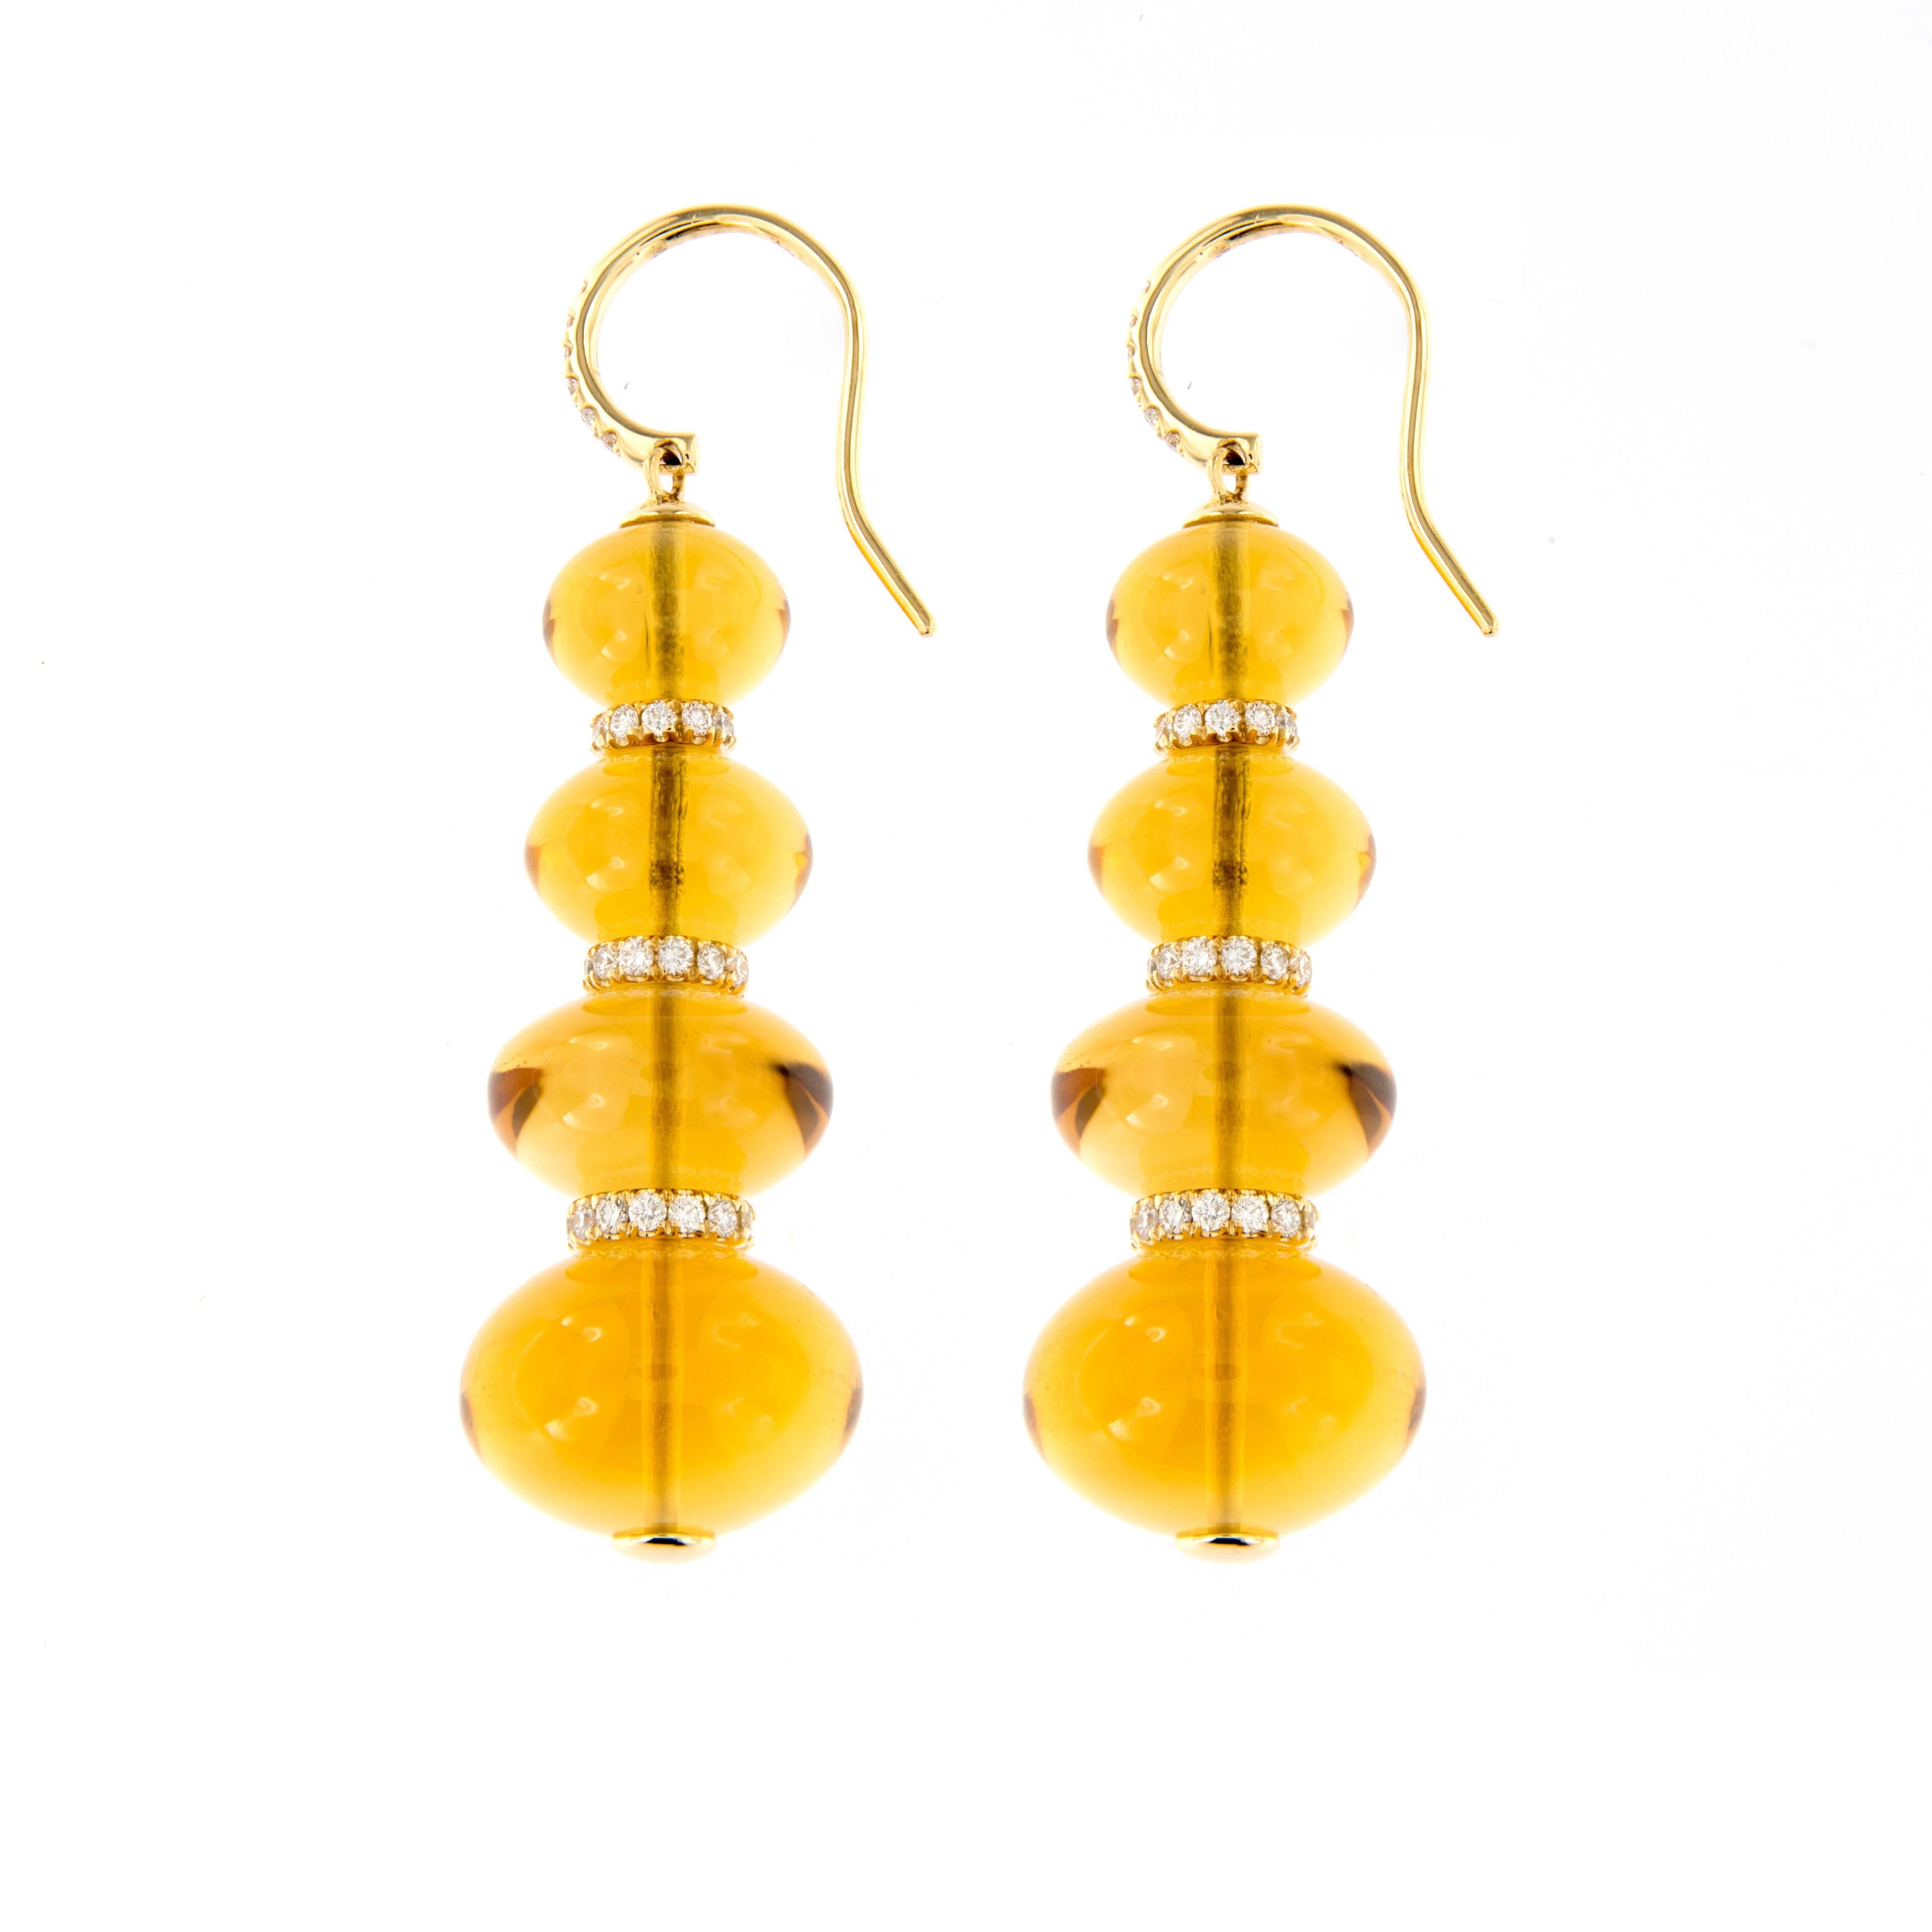 ‘Beyond’ 4-tier citrine bead earrings with diamond hook and diamond rondels in 18k yellow gold designed by Goshwara. Weigh 20.7 grams.

Citrine 78.97 cttw
Diamond 0.92 ct